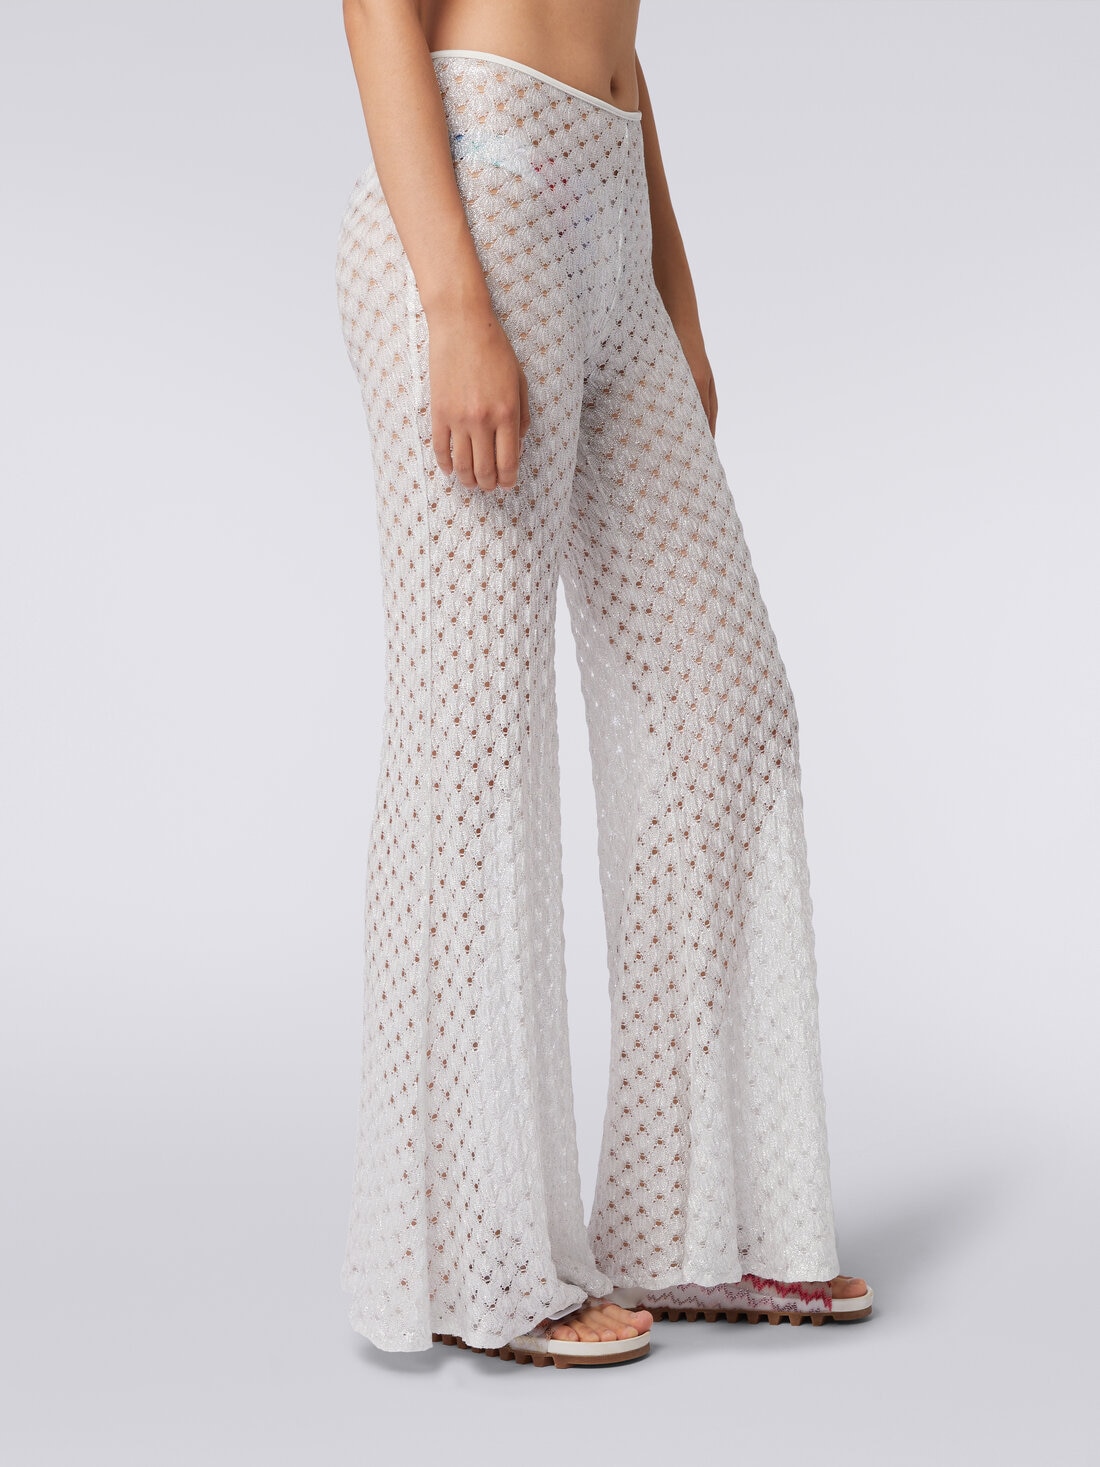 Lace-effect cover up trousers with flared hem, White  - MS24SI00BR00TC14001 - 4